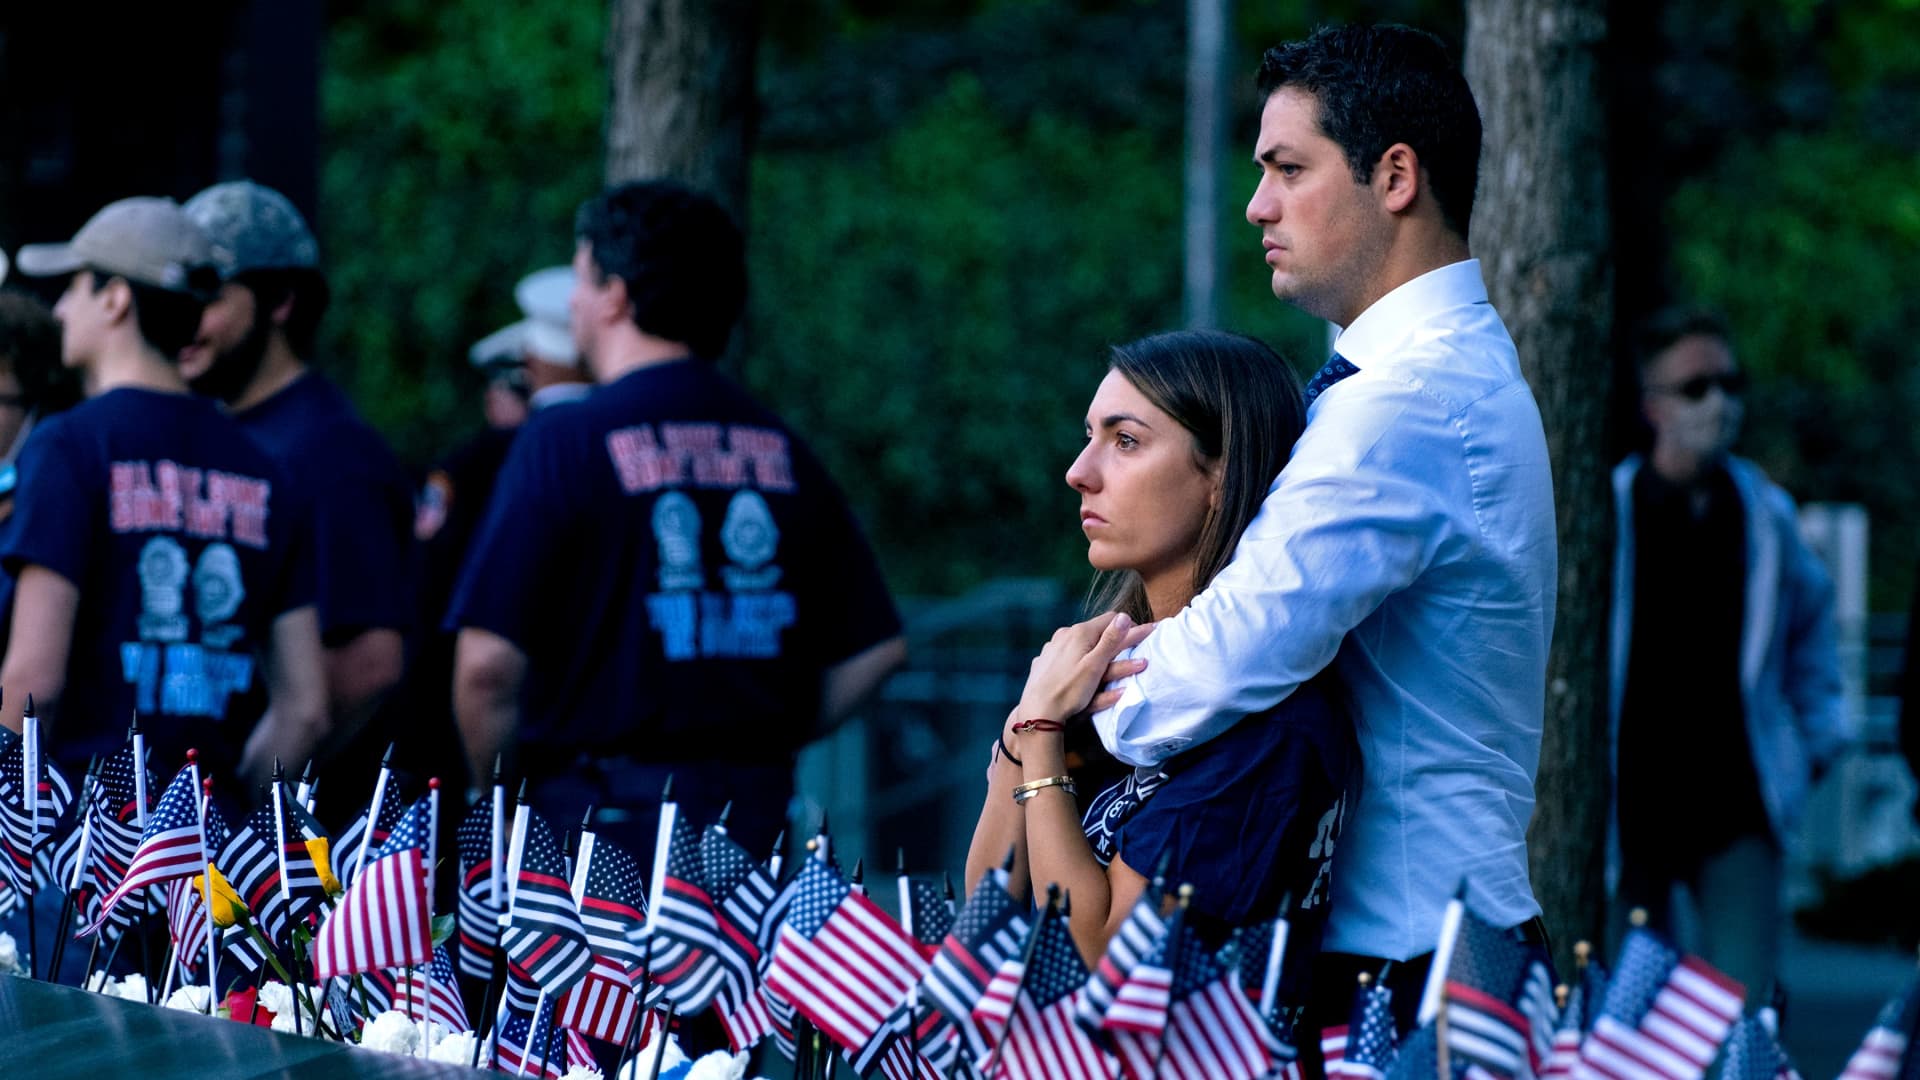 Katie Mascali is comforted by her fiance Andre Jabban as they stand near the name of her father Joseph Mascali, with FDNY Rescue 5, as they attend ceremonies on September 11, 2021, marking the attacks on the World Trade Center in Manhattan.